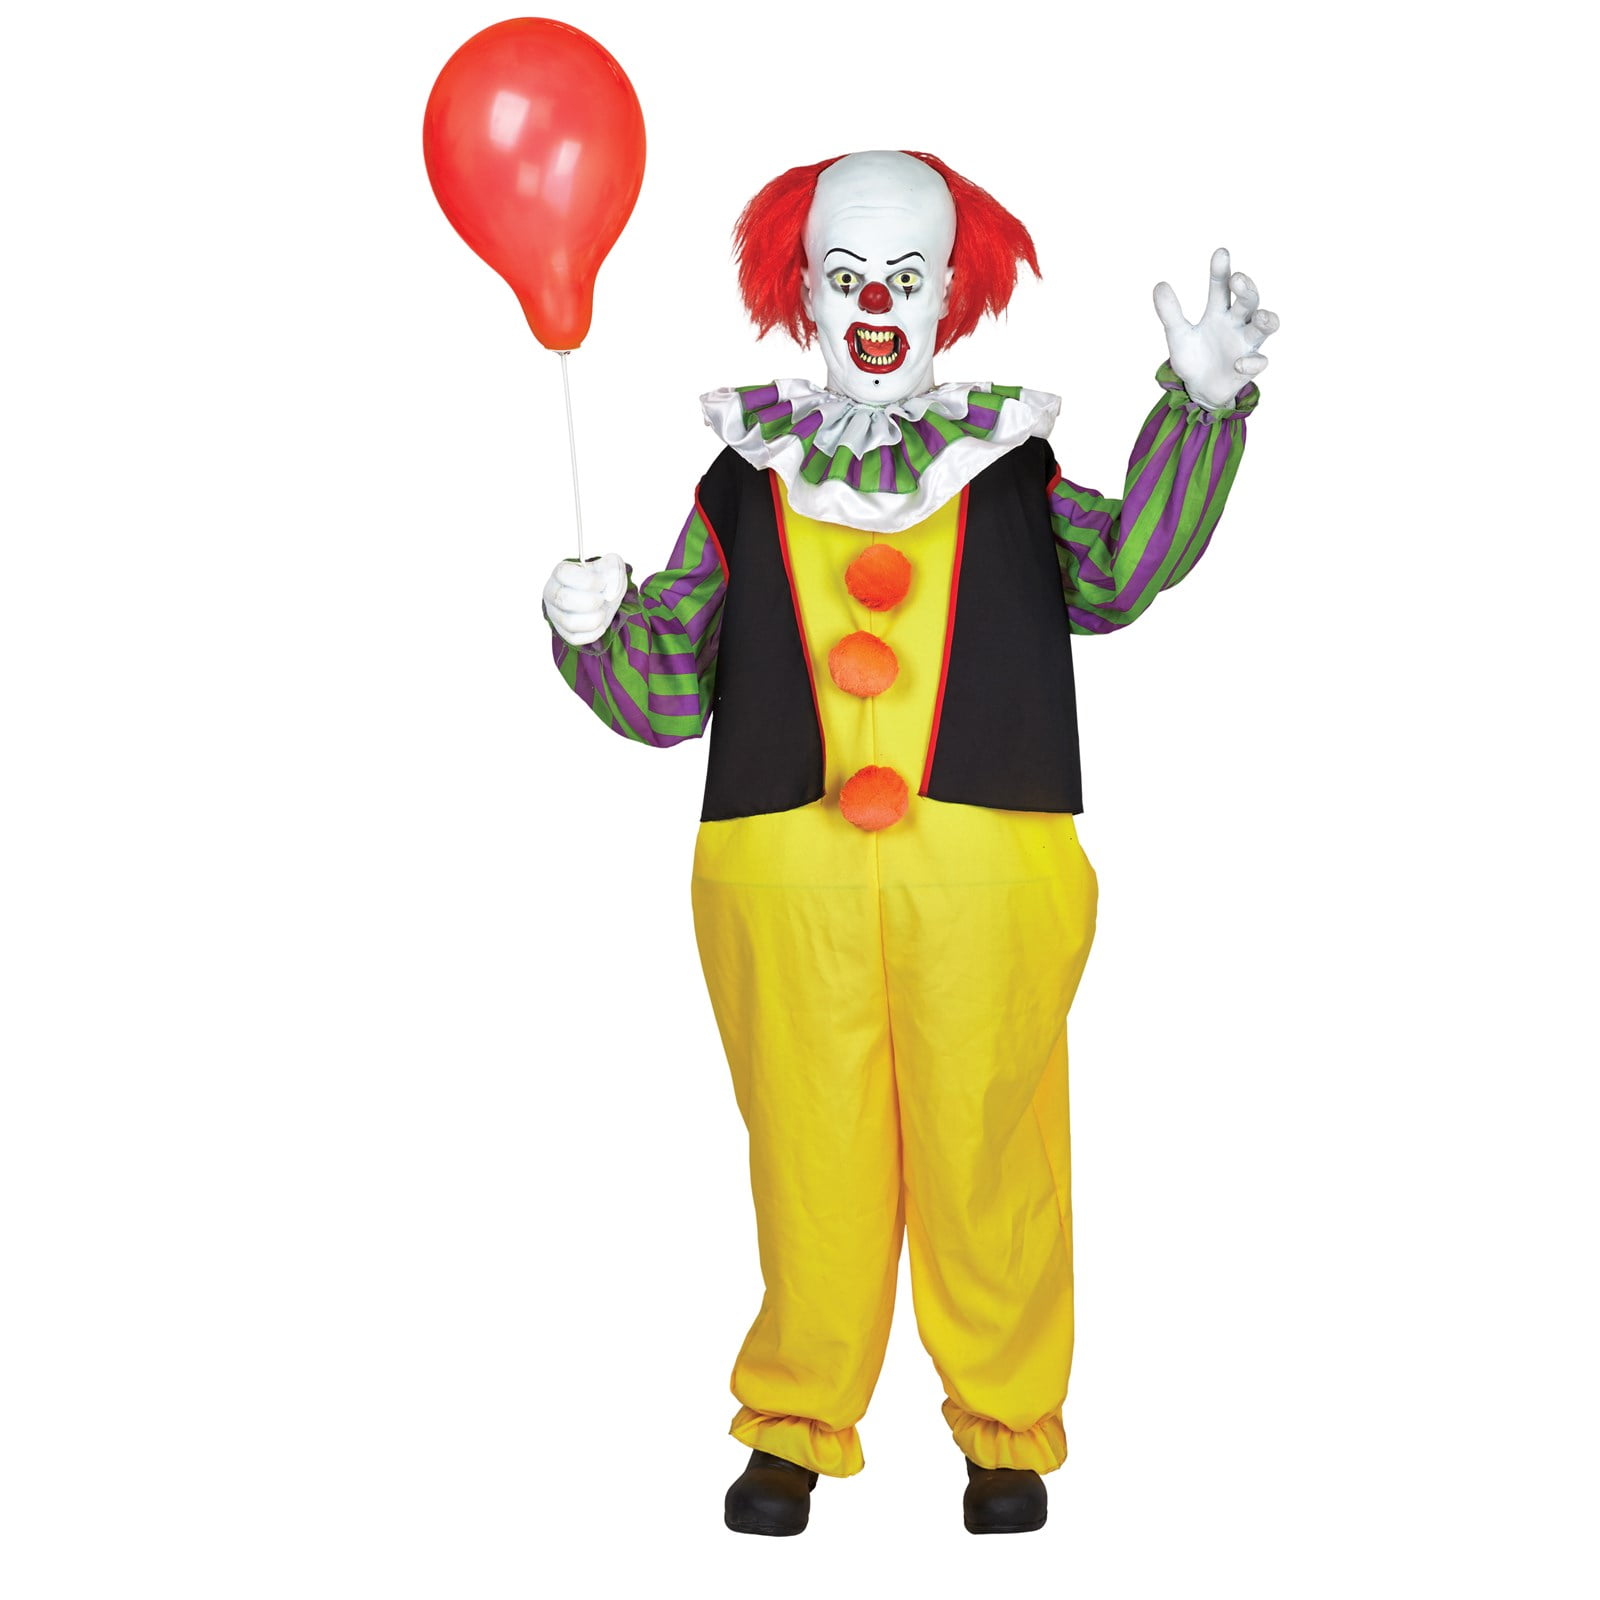 Life-sized Animated Pennywise Prop Halloween Decoration - Walmart.com